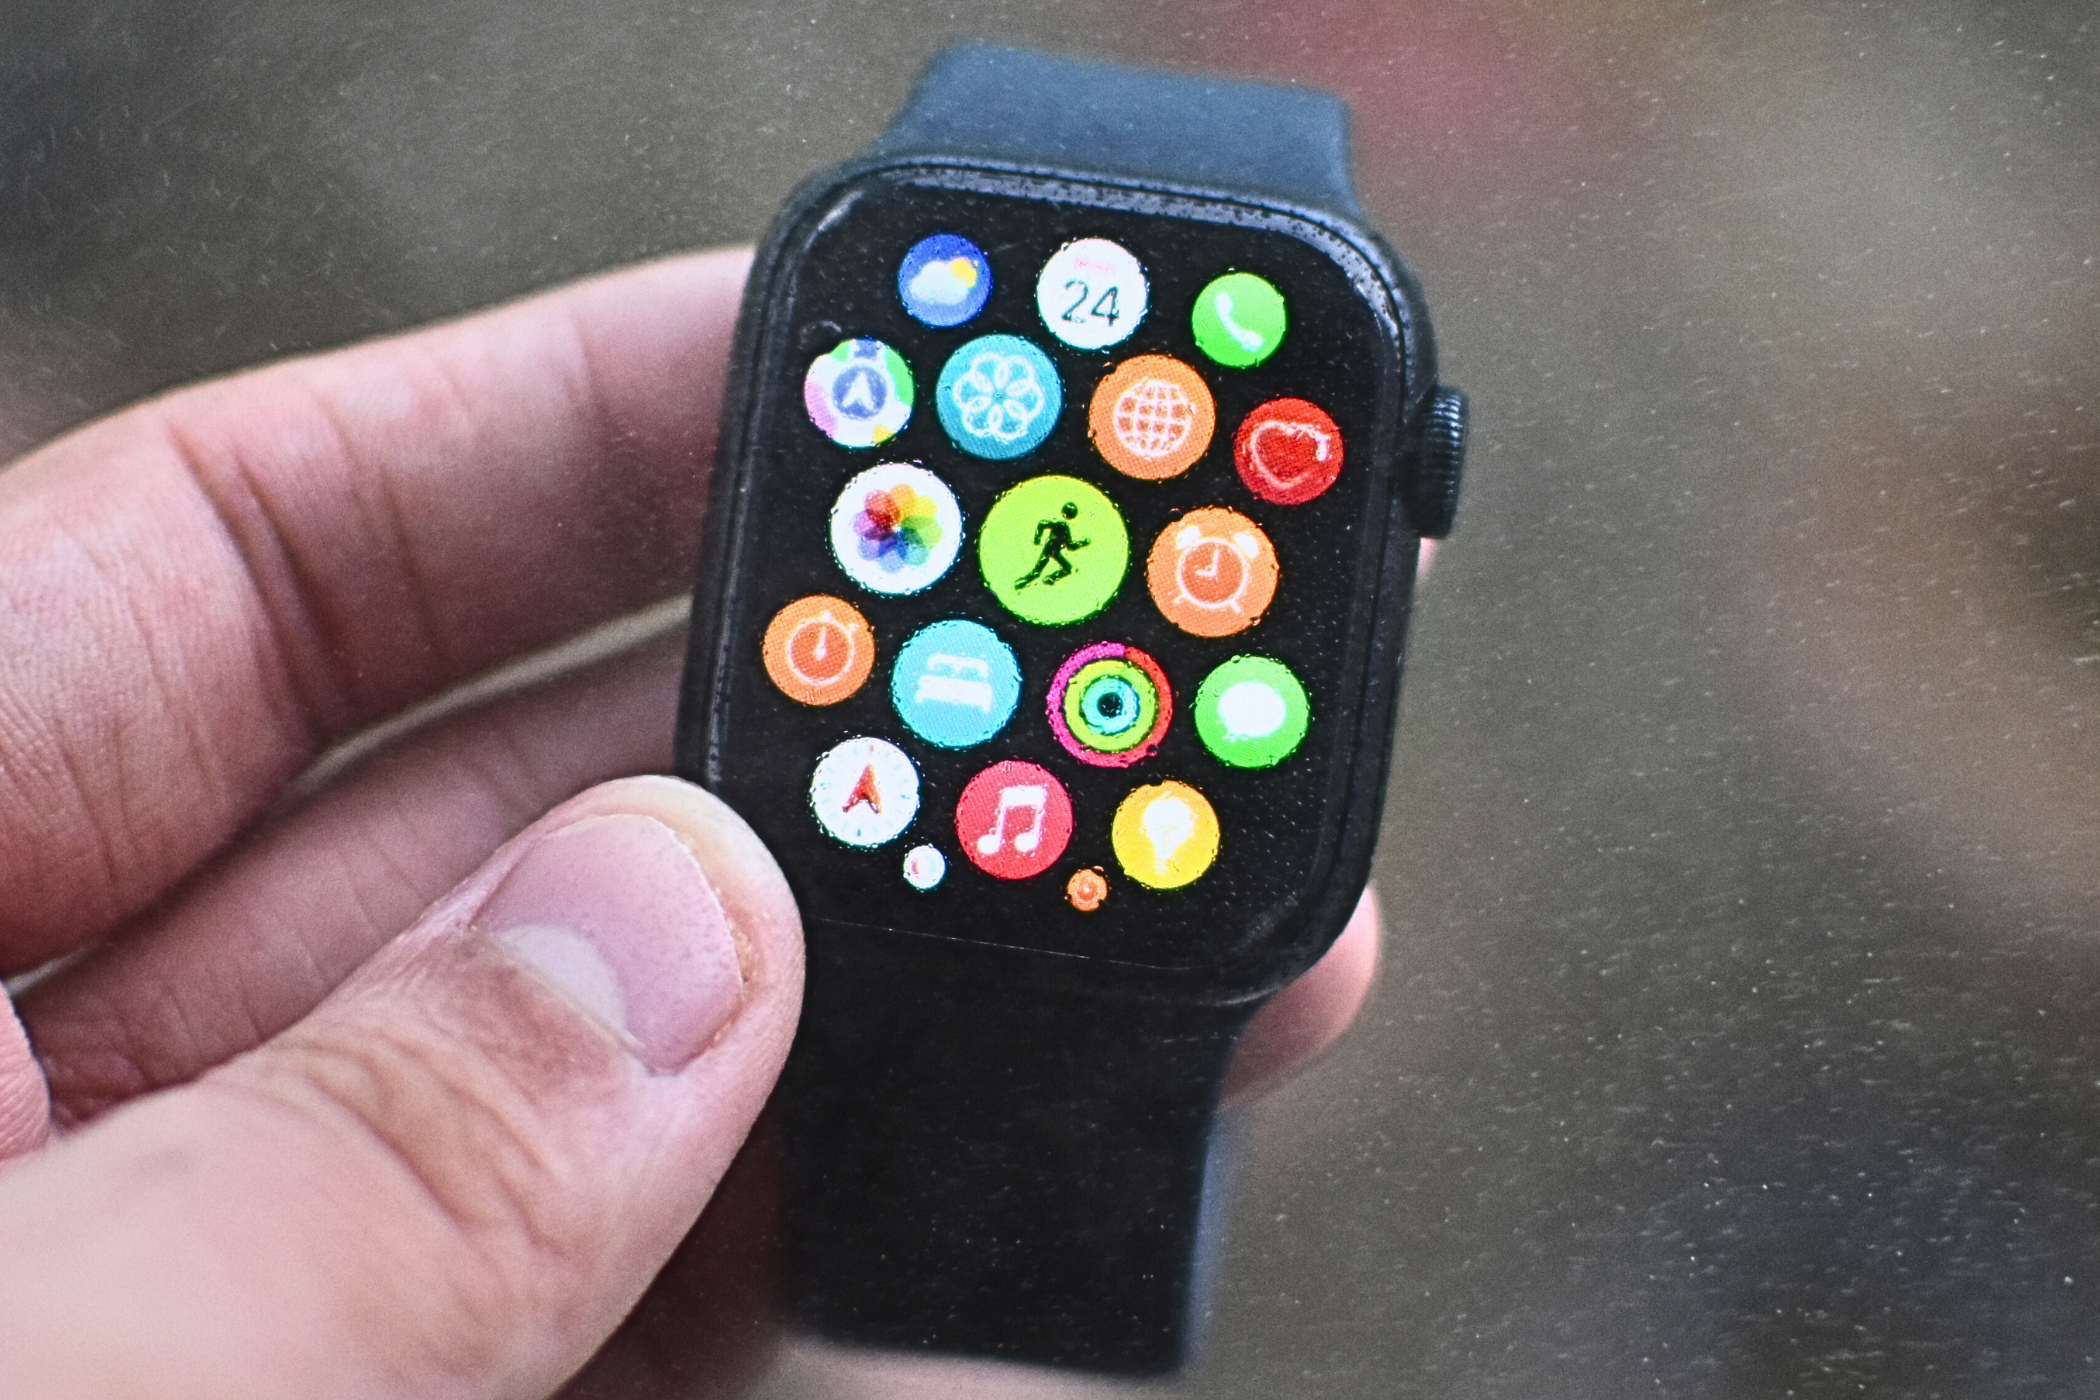 Apple Watch with tiny water droplets in the foreground and the background.